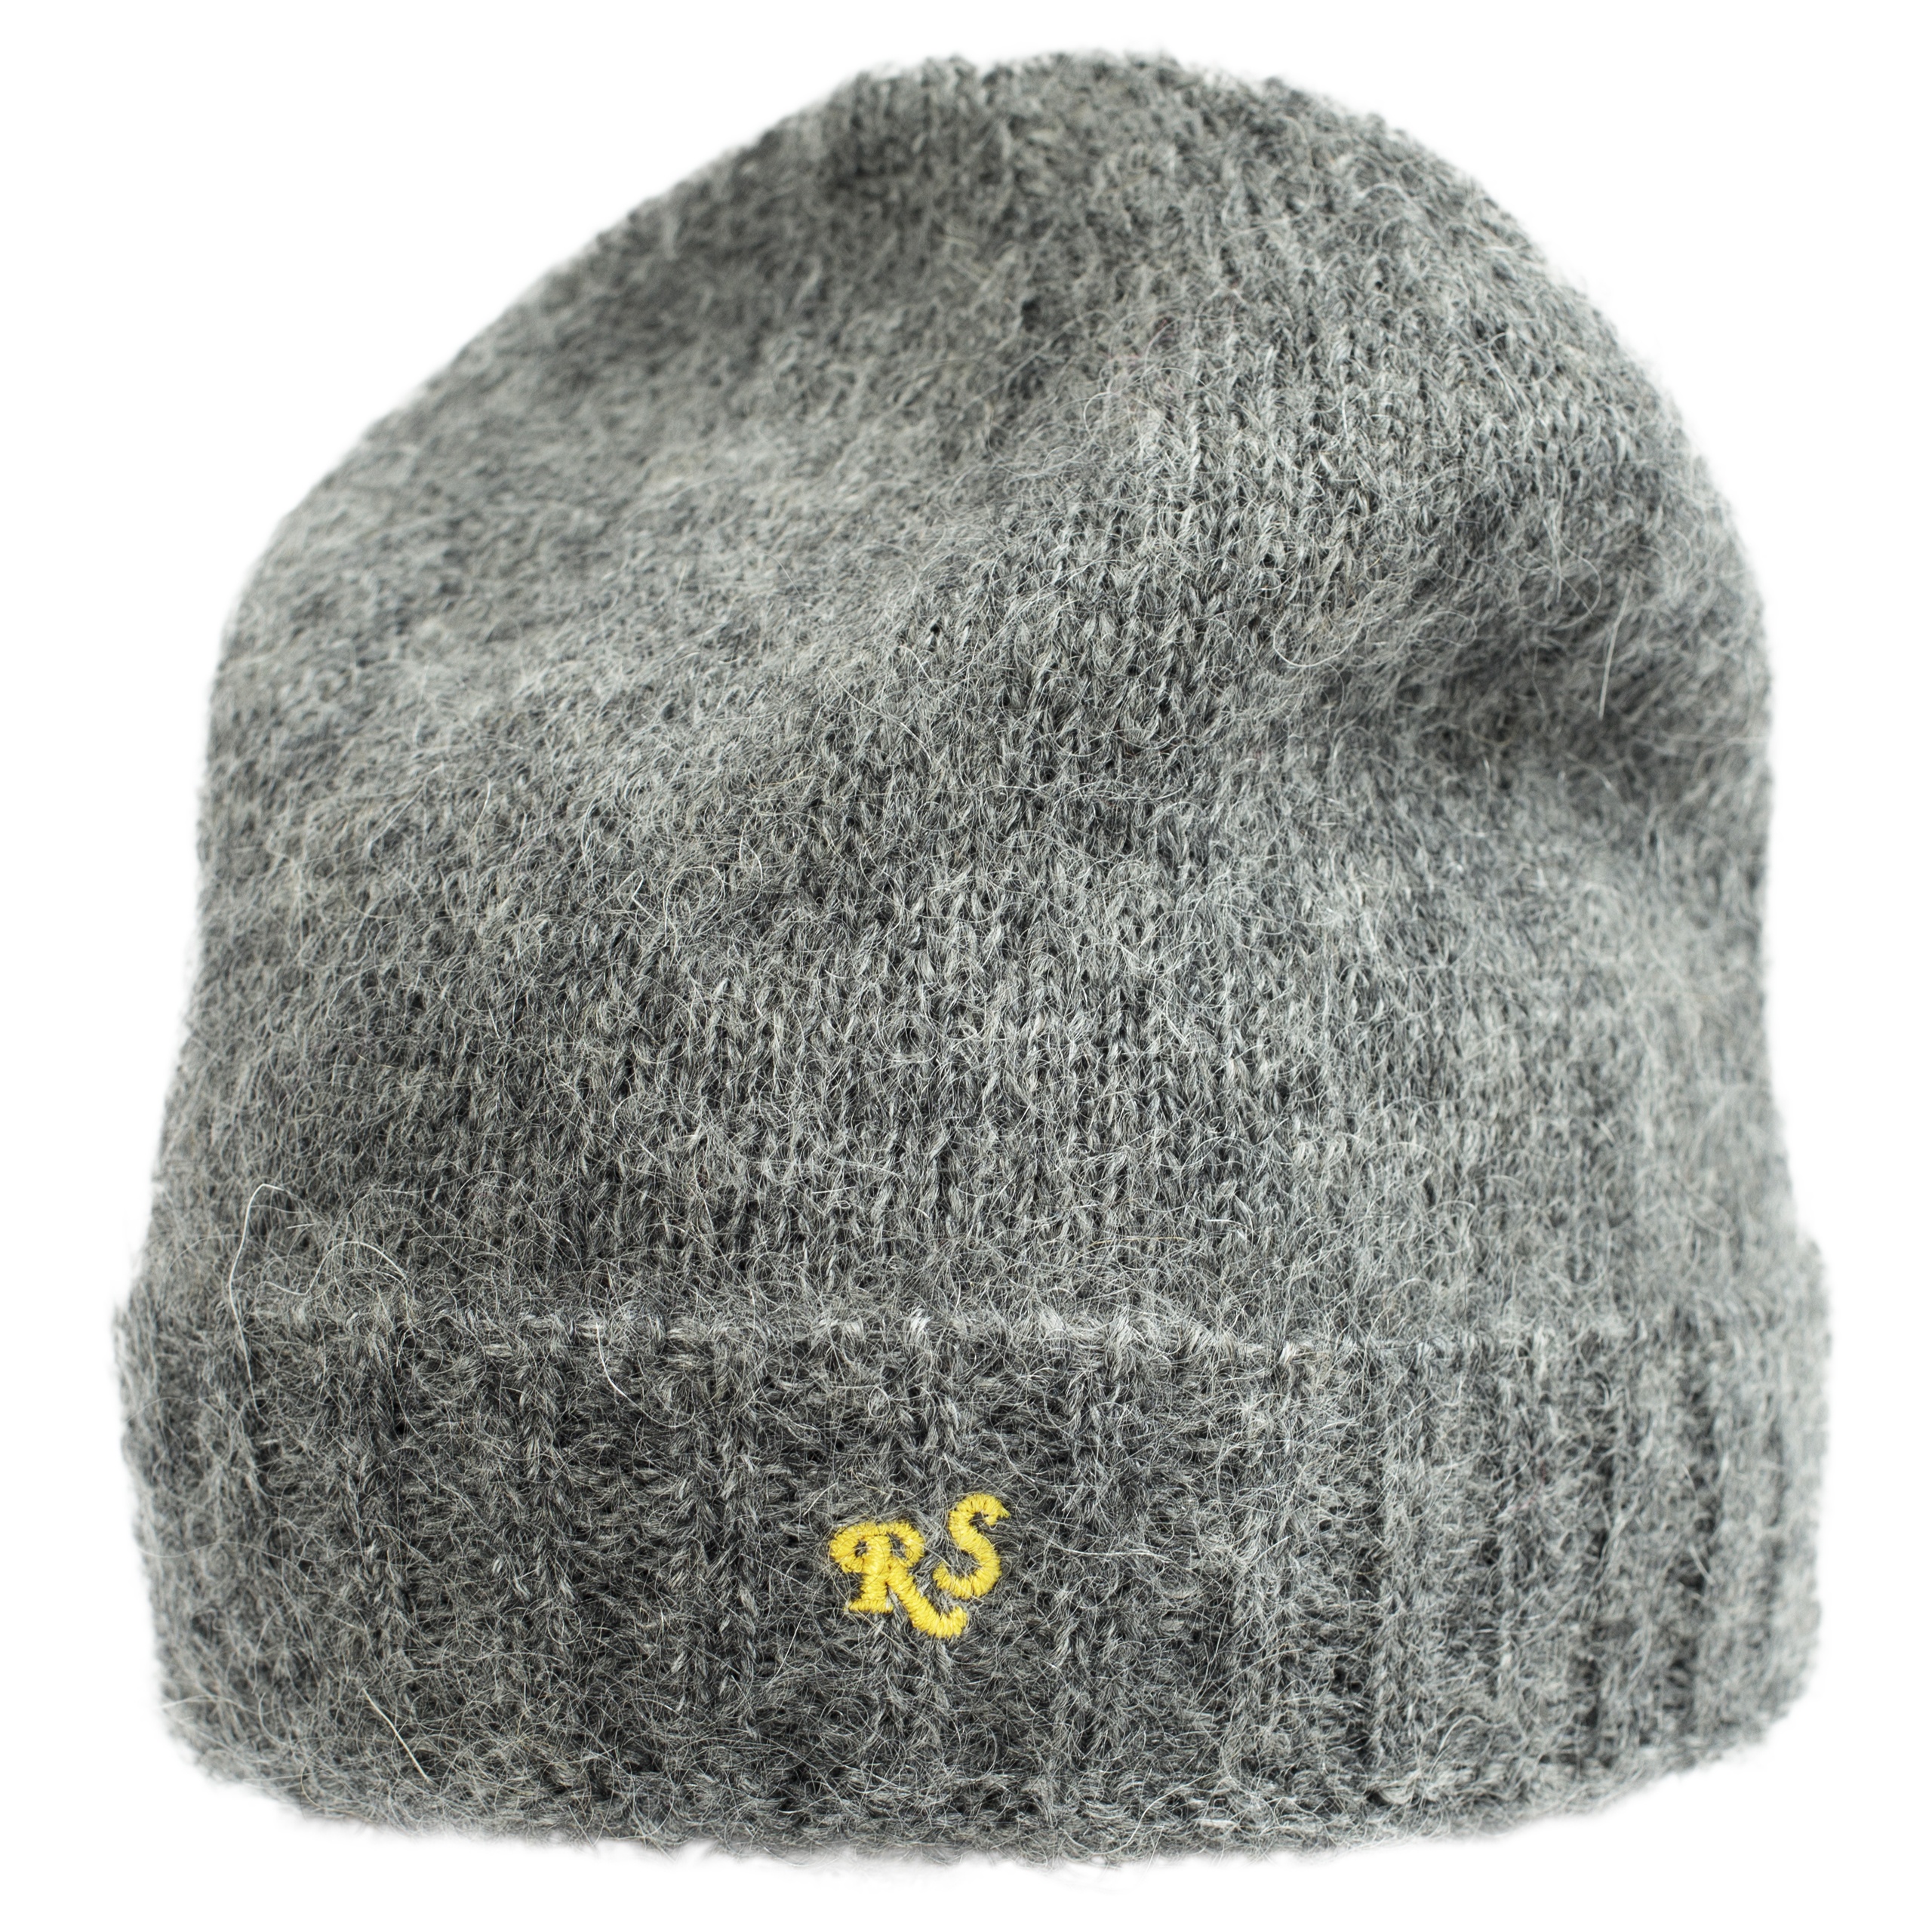 RS KNITTED BEANIE IN GREY - 1